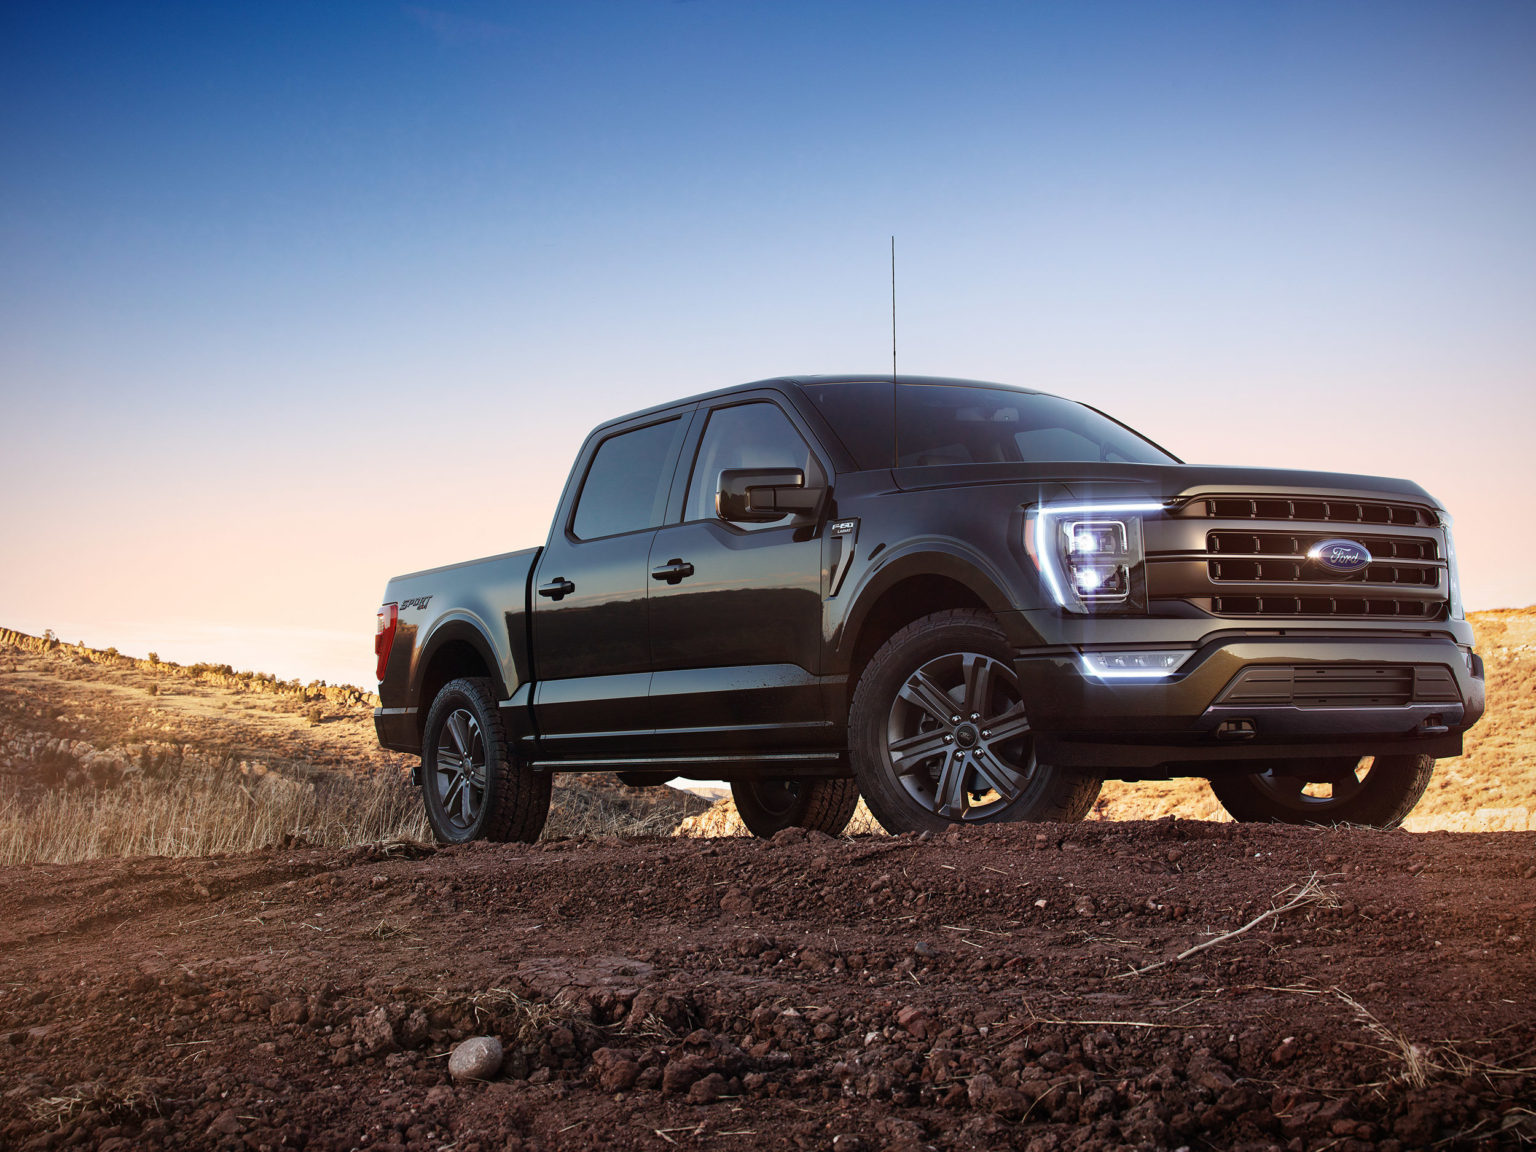 The 2021 Ford F-150 goes on sale later this year.